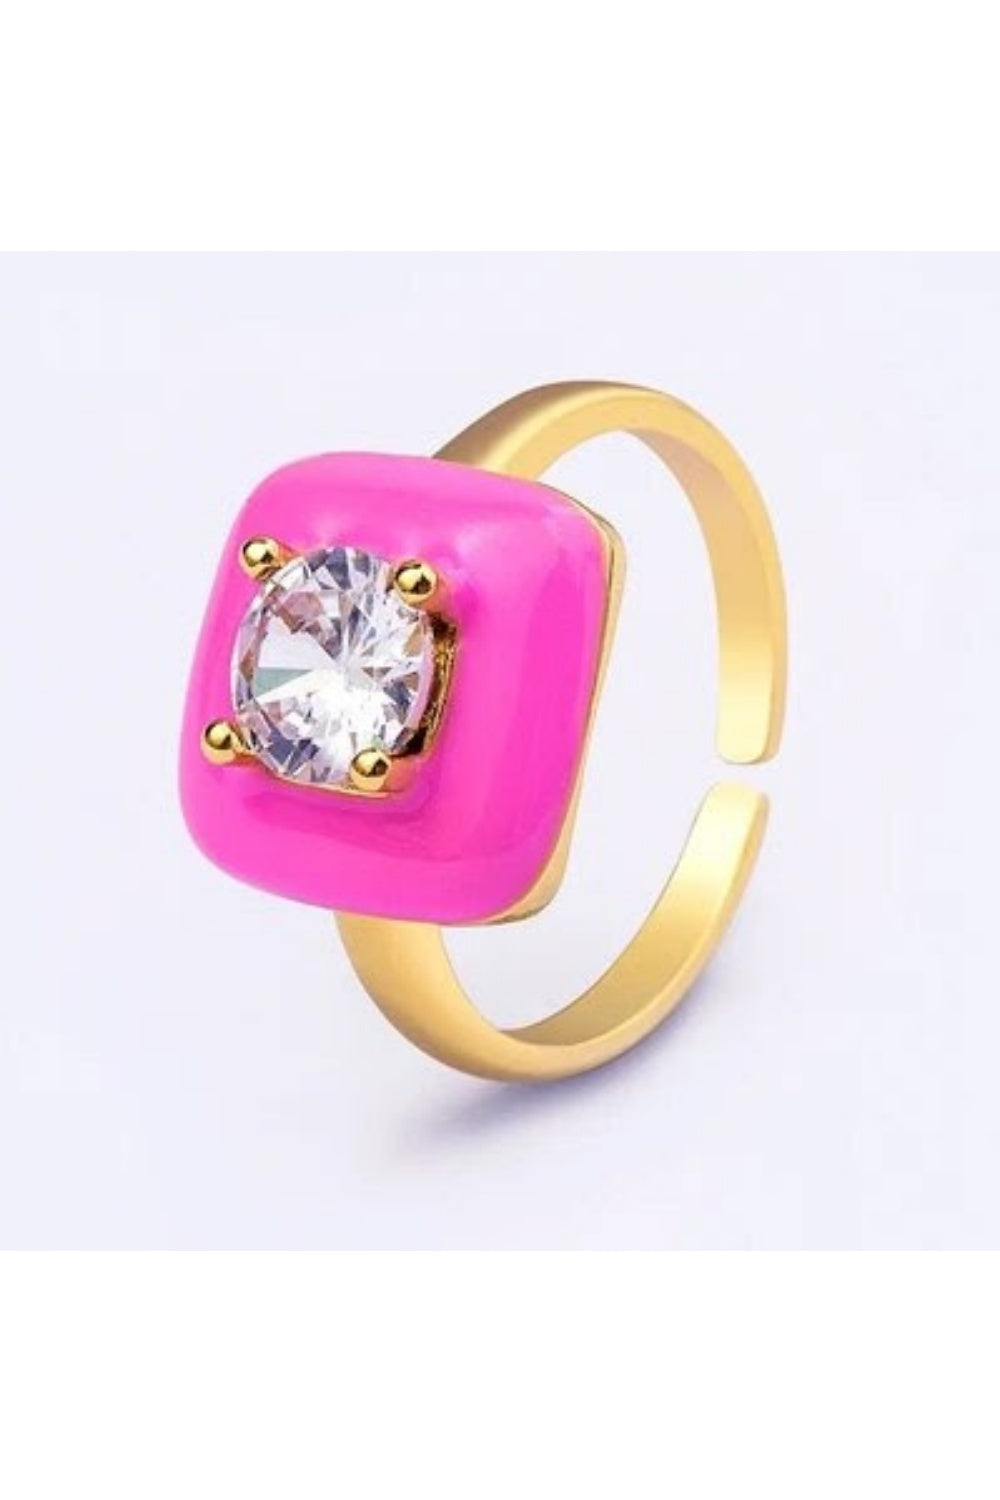 PRETTY SQUARE RING PINK